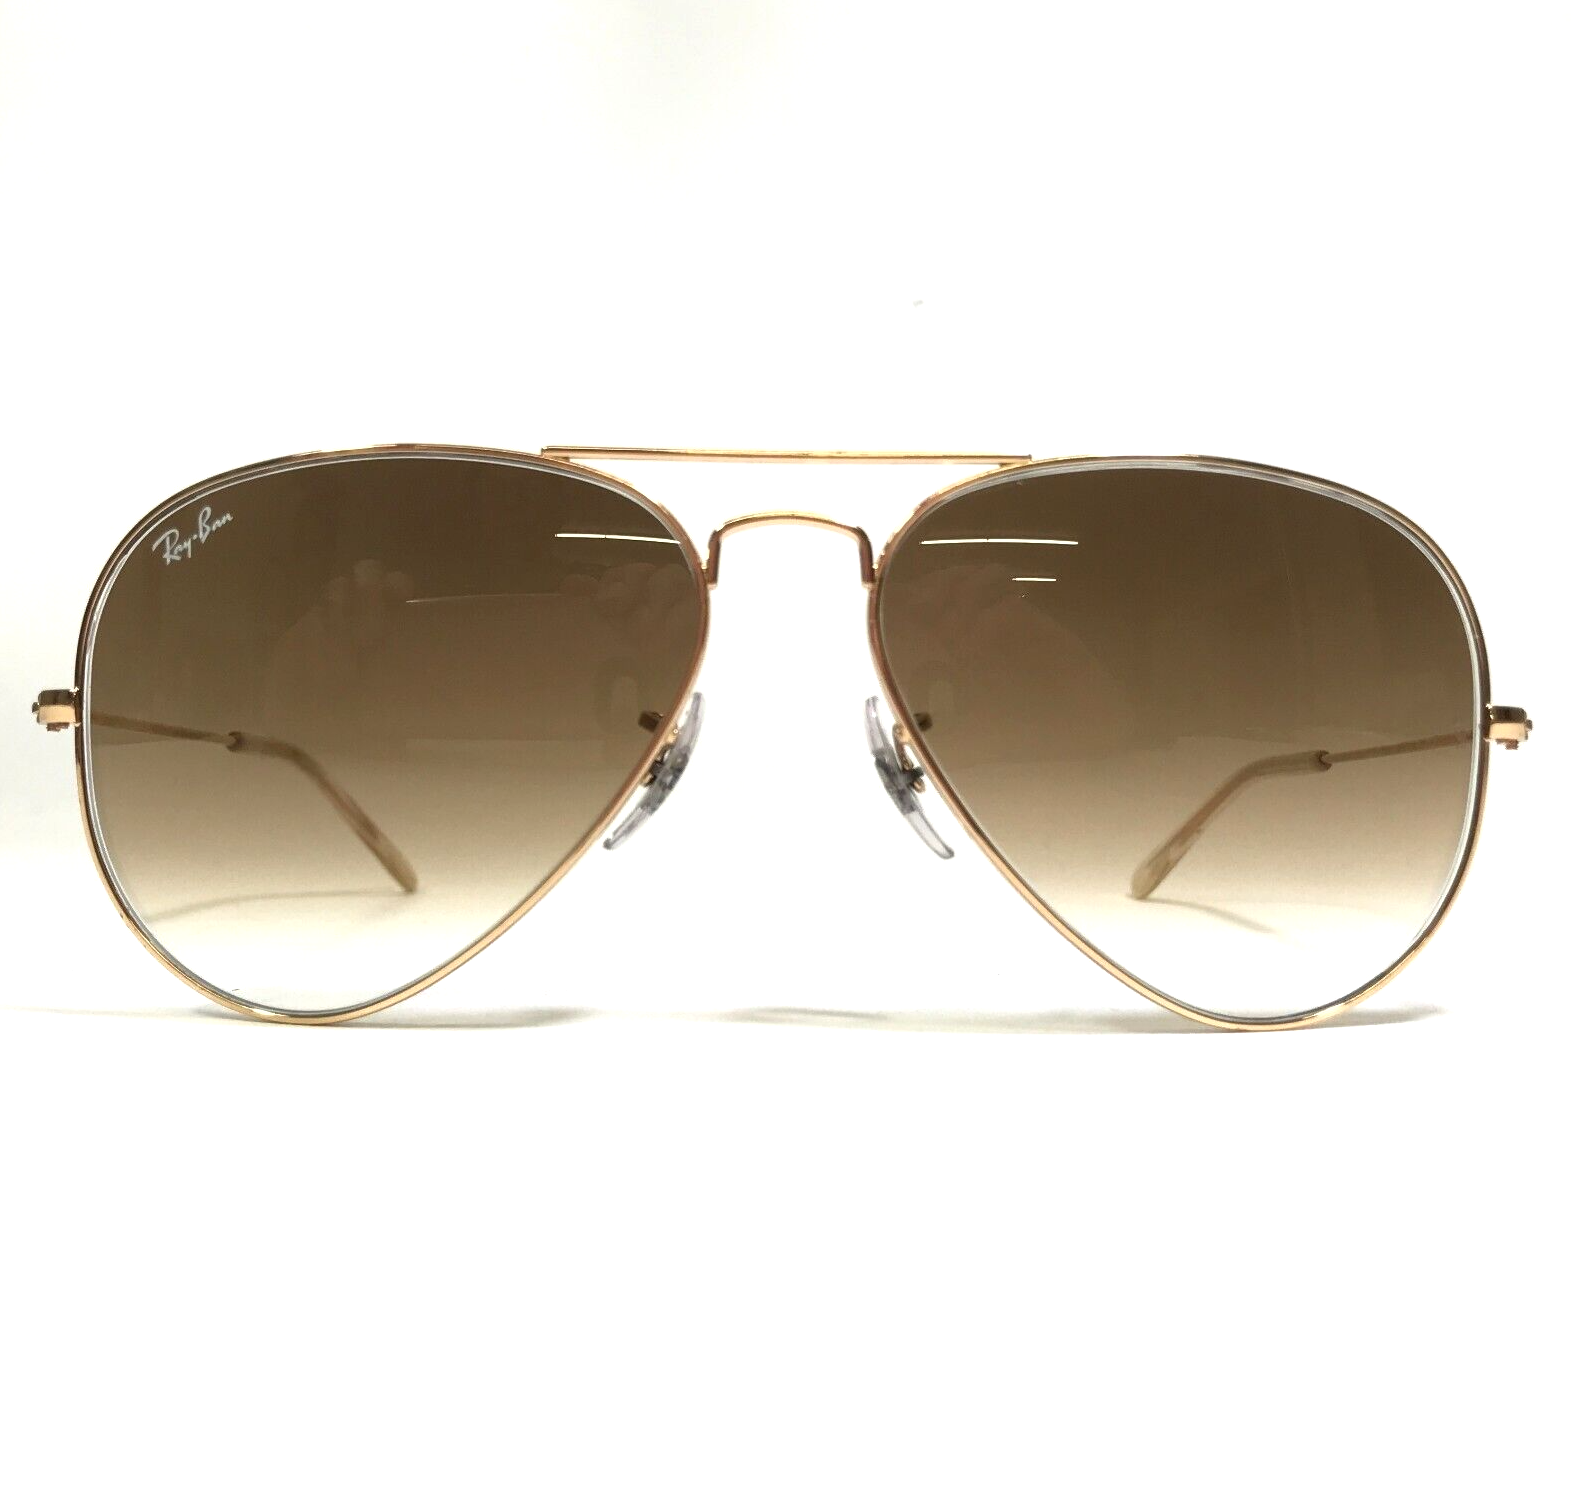 Ray-Ban Sunglasses RB3025 AVIATOR LARGE METAL 001/51 Gold with Brown Lenses - $102.63